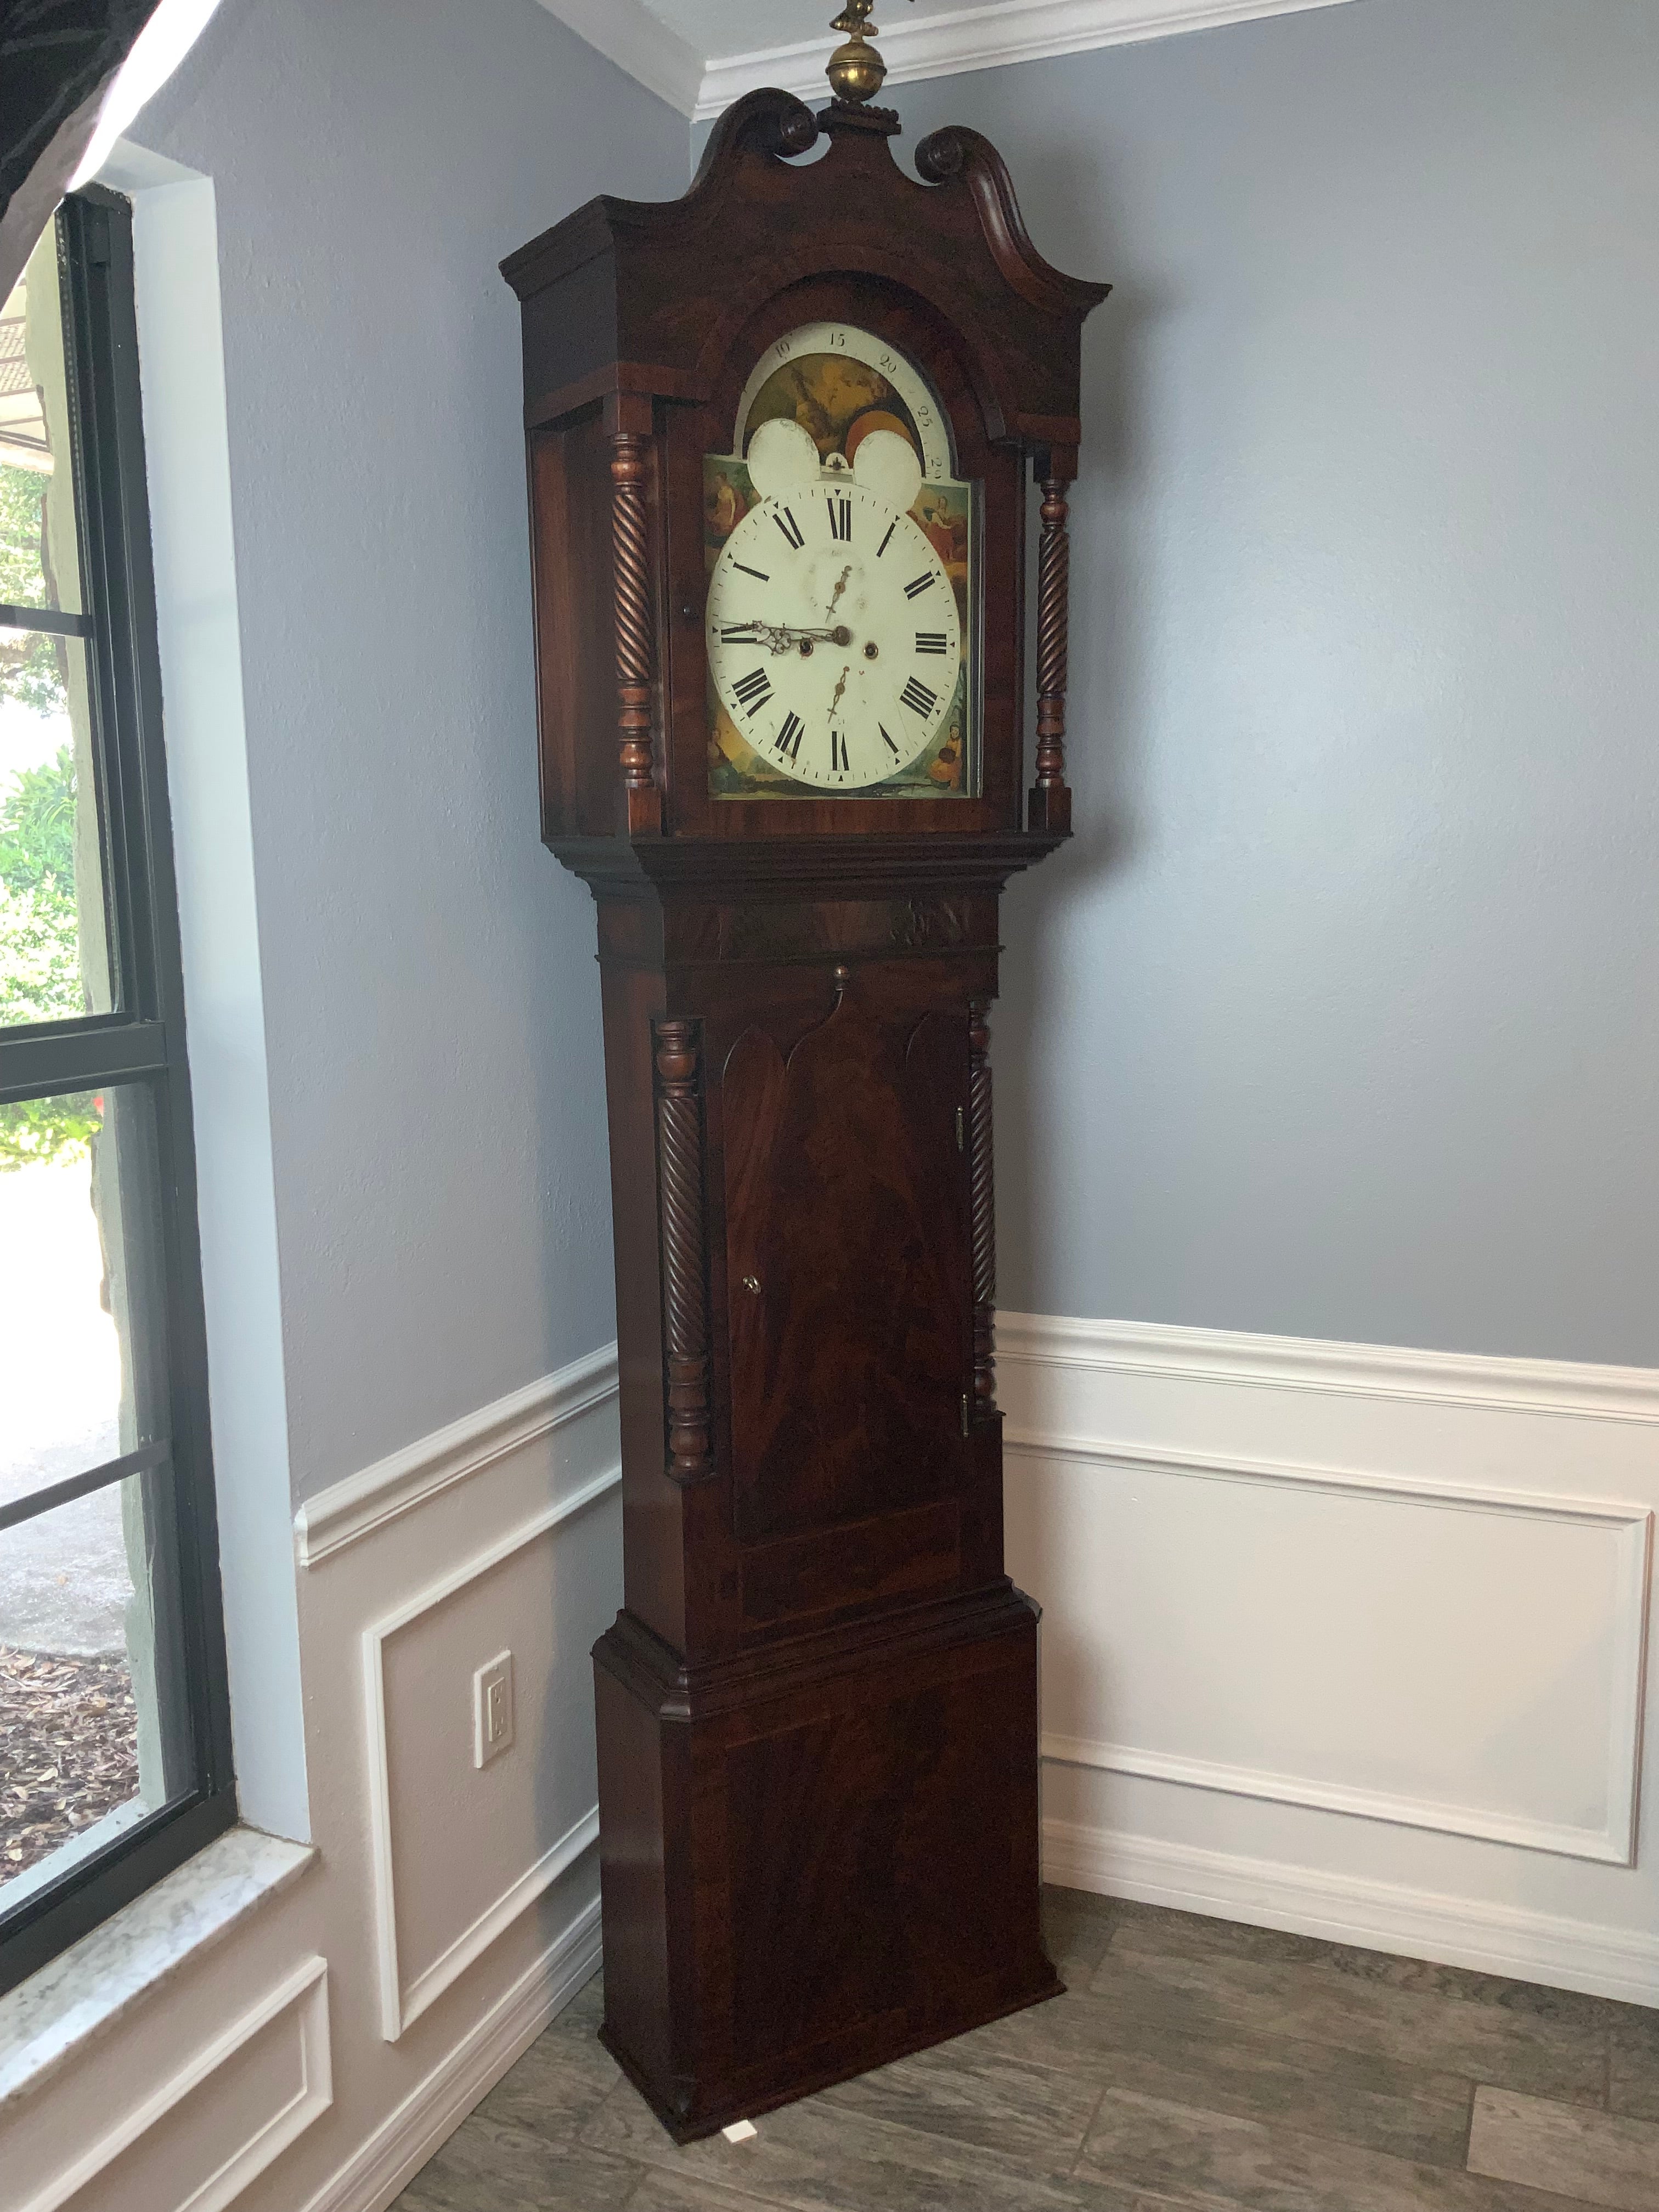 A very nice quality mid 19th century English Mahogany long case clock. Decorative figured Mahogany case with an arched hood with swan neck pediment. Polished pierced Brass hands.  Painted dial with phases of the moon and hemispheres.  False plate